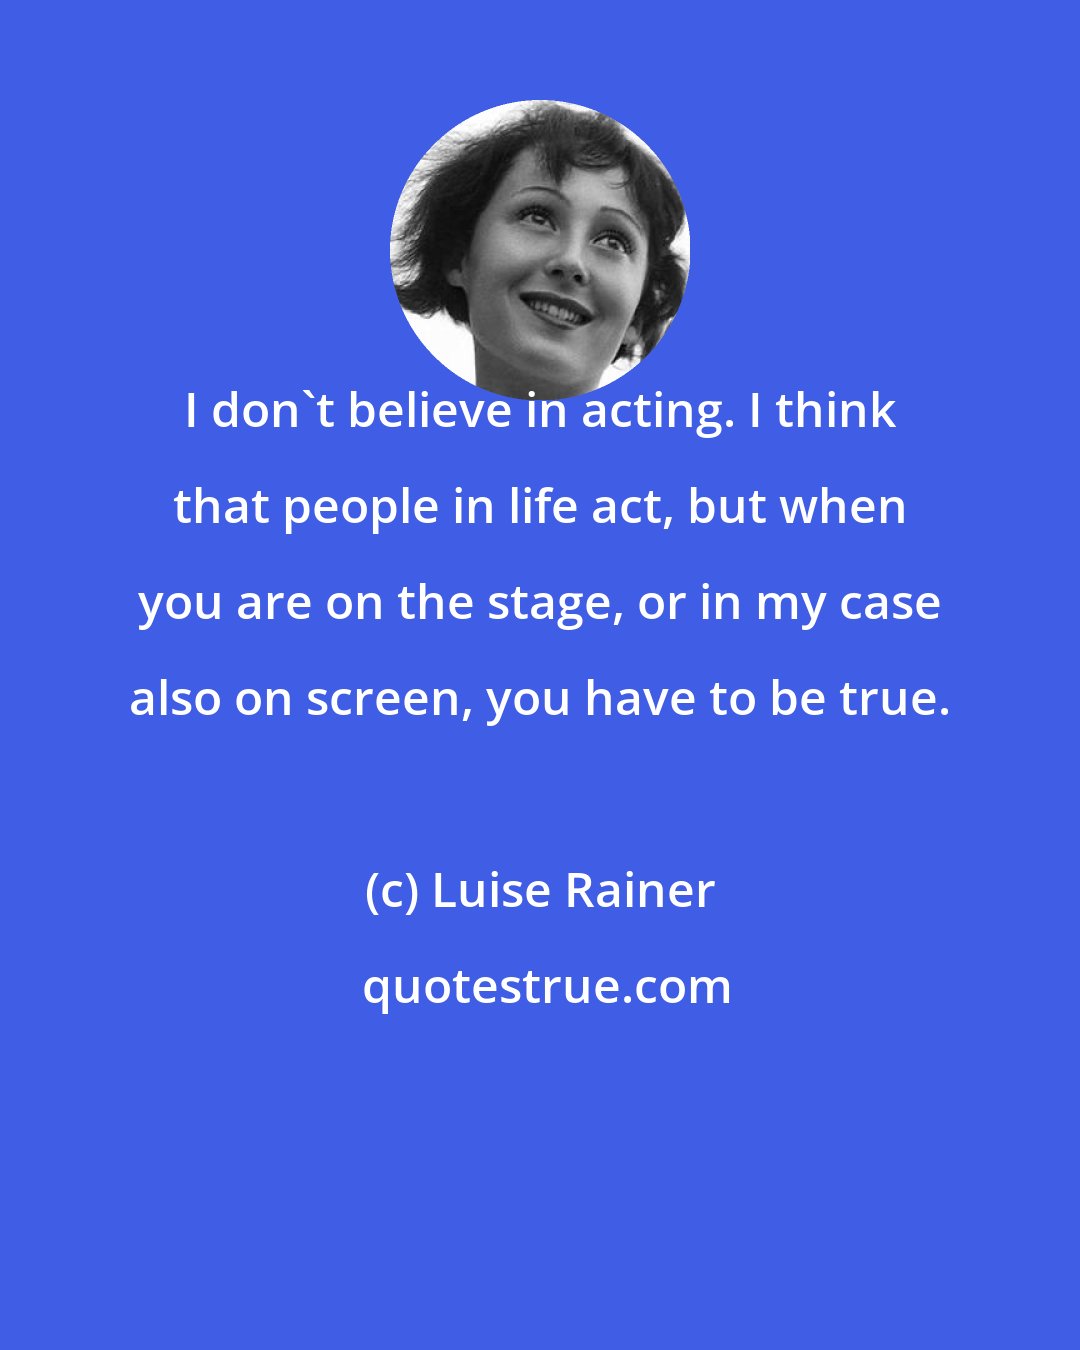 Luise Rainer: I don't believe in acting. I think that people in life act, but when you are on the stage, or in my case also on screen, you have to be true.